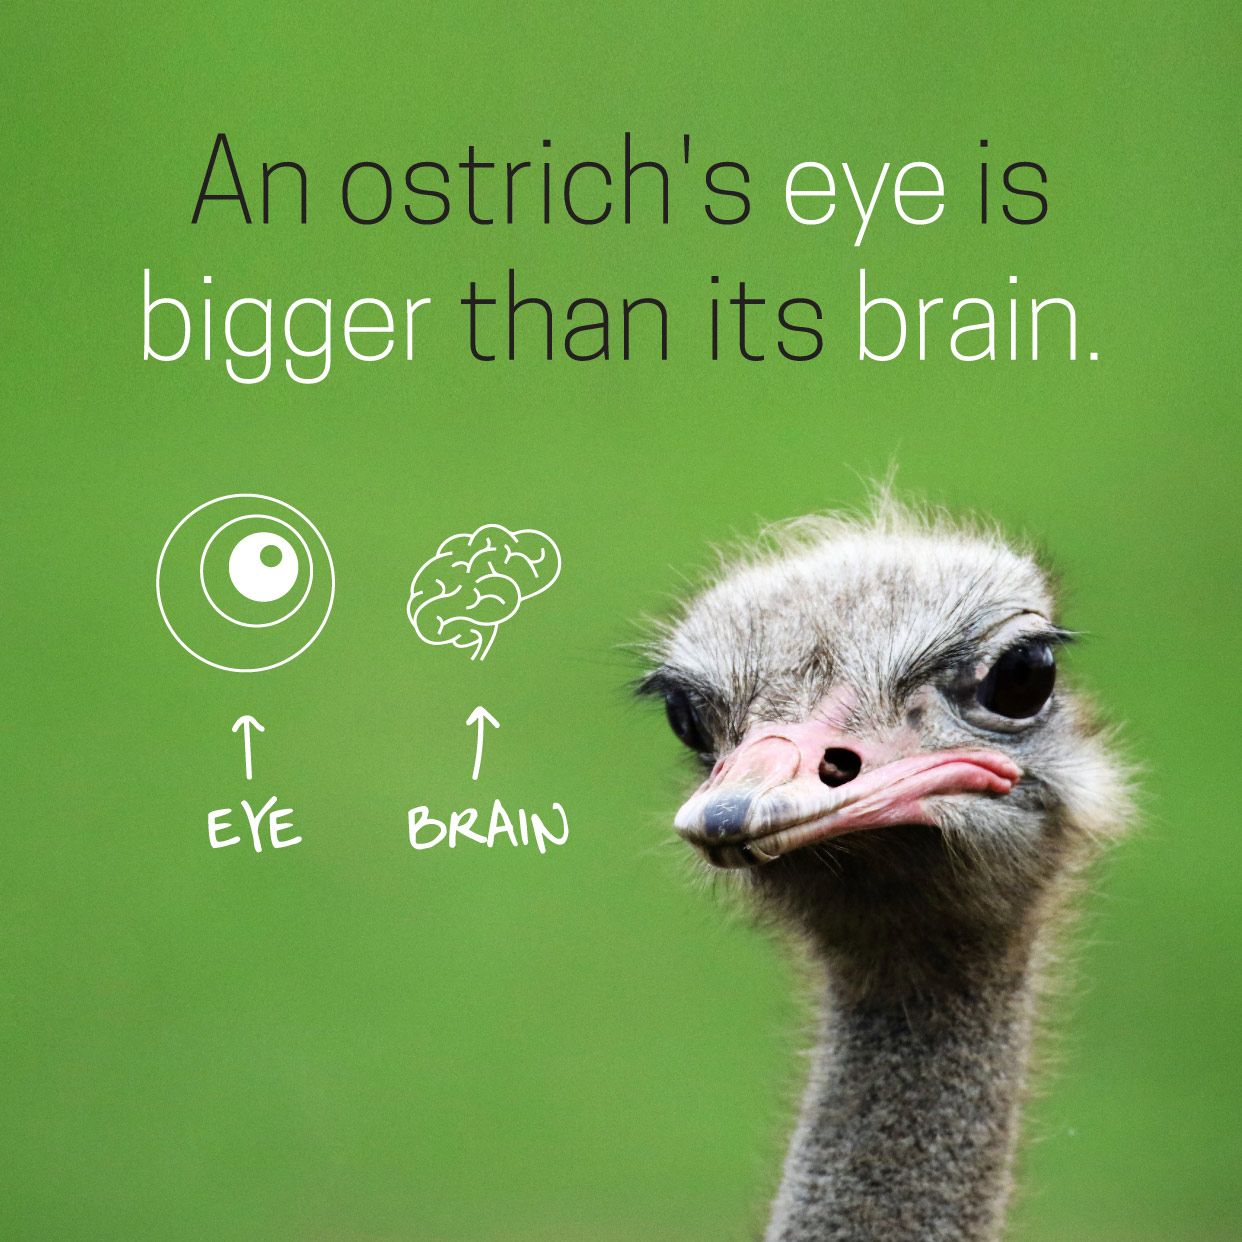 Is Ostrich eye is bigger than its brain?